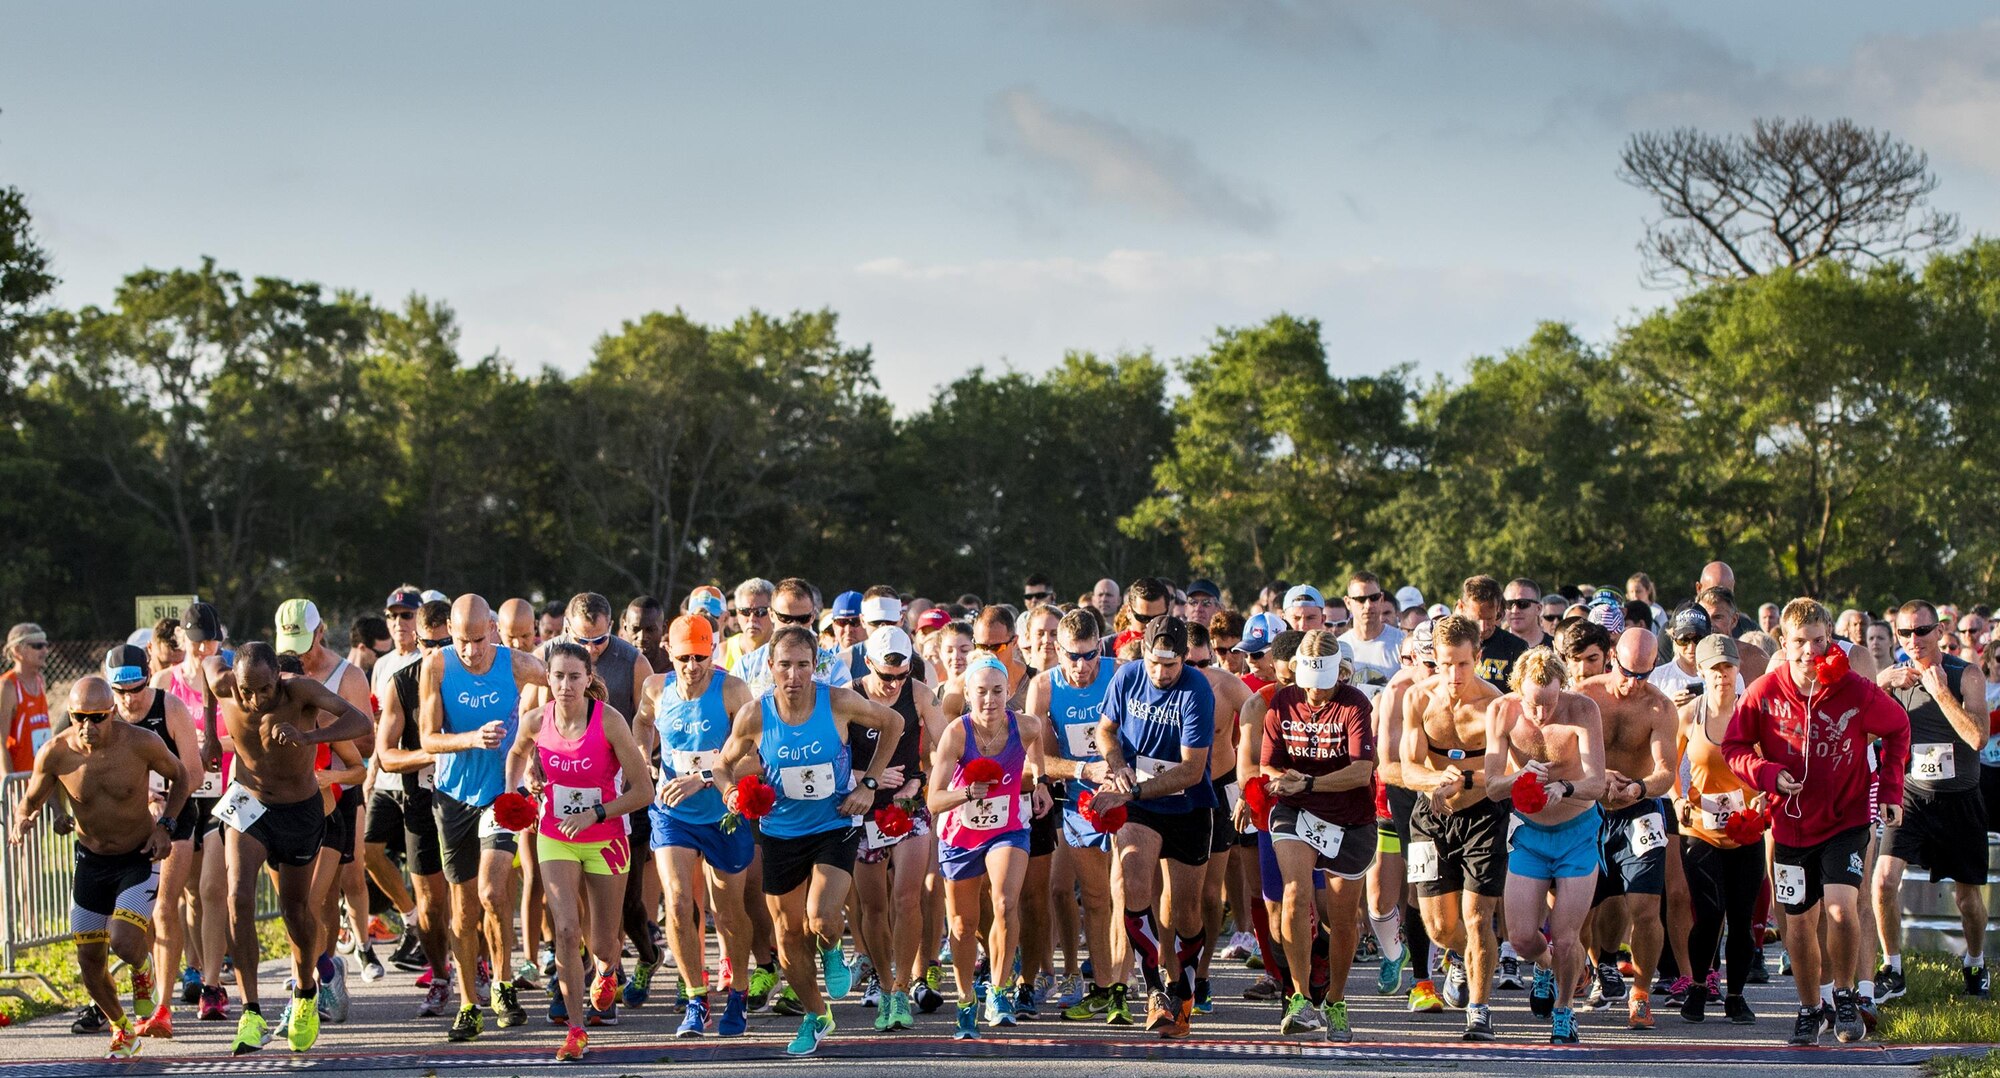 The runners take off as the 32nd annual Gate to Gate run begins at Eglin Air Force Base, Fla., May 27.  More than 900 people participated at this year’s event.  (U.S. Air Force photo/Samuel King Jr.)